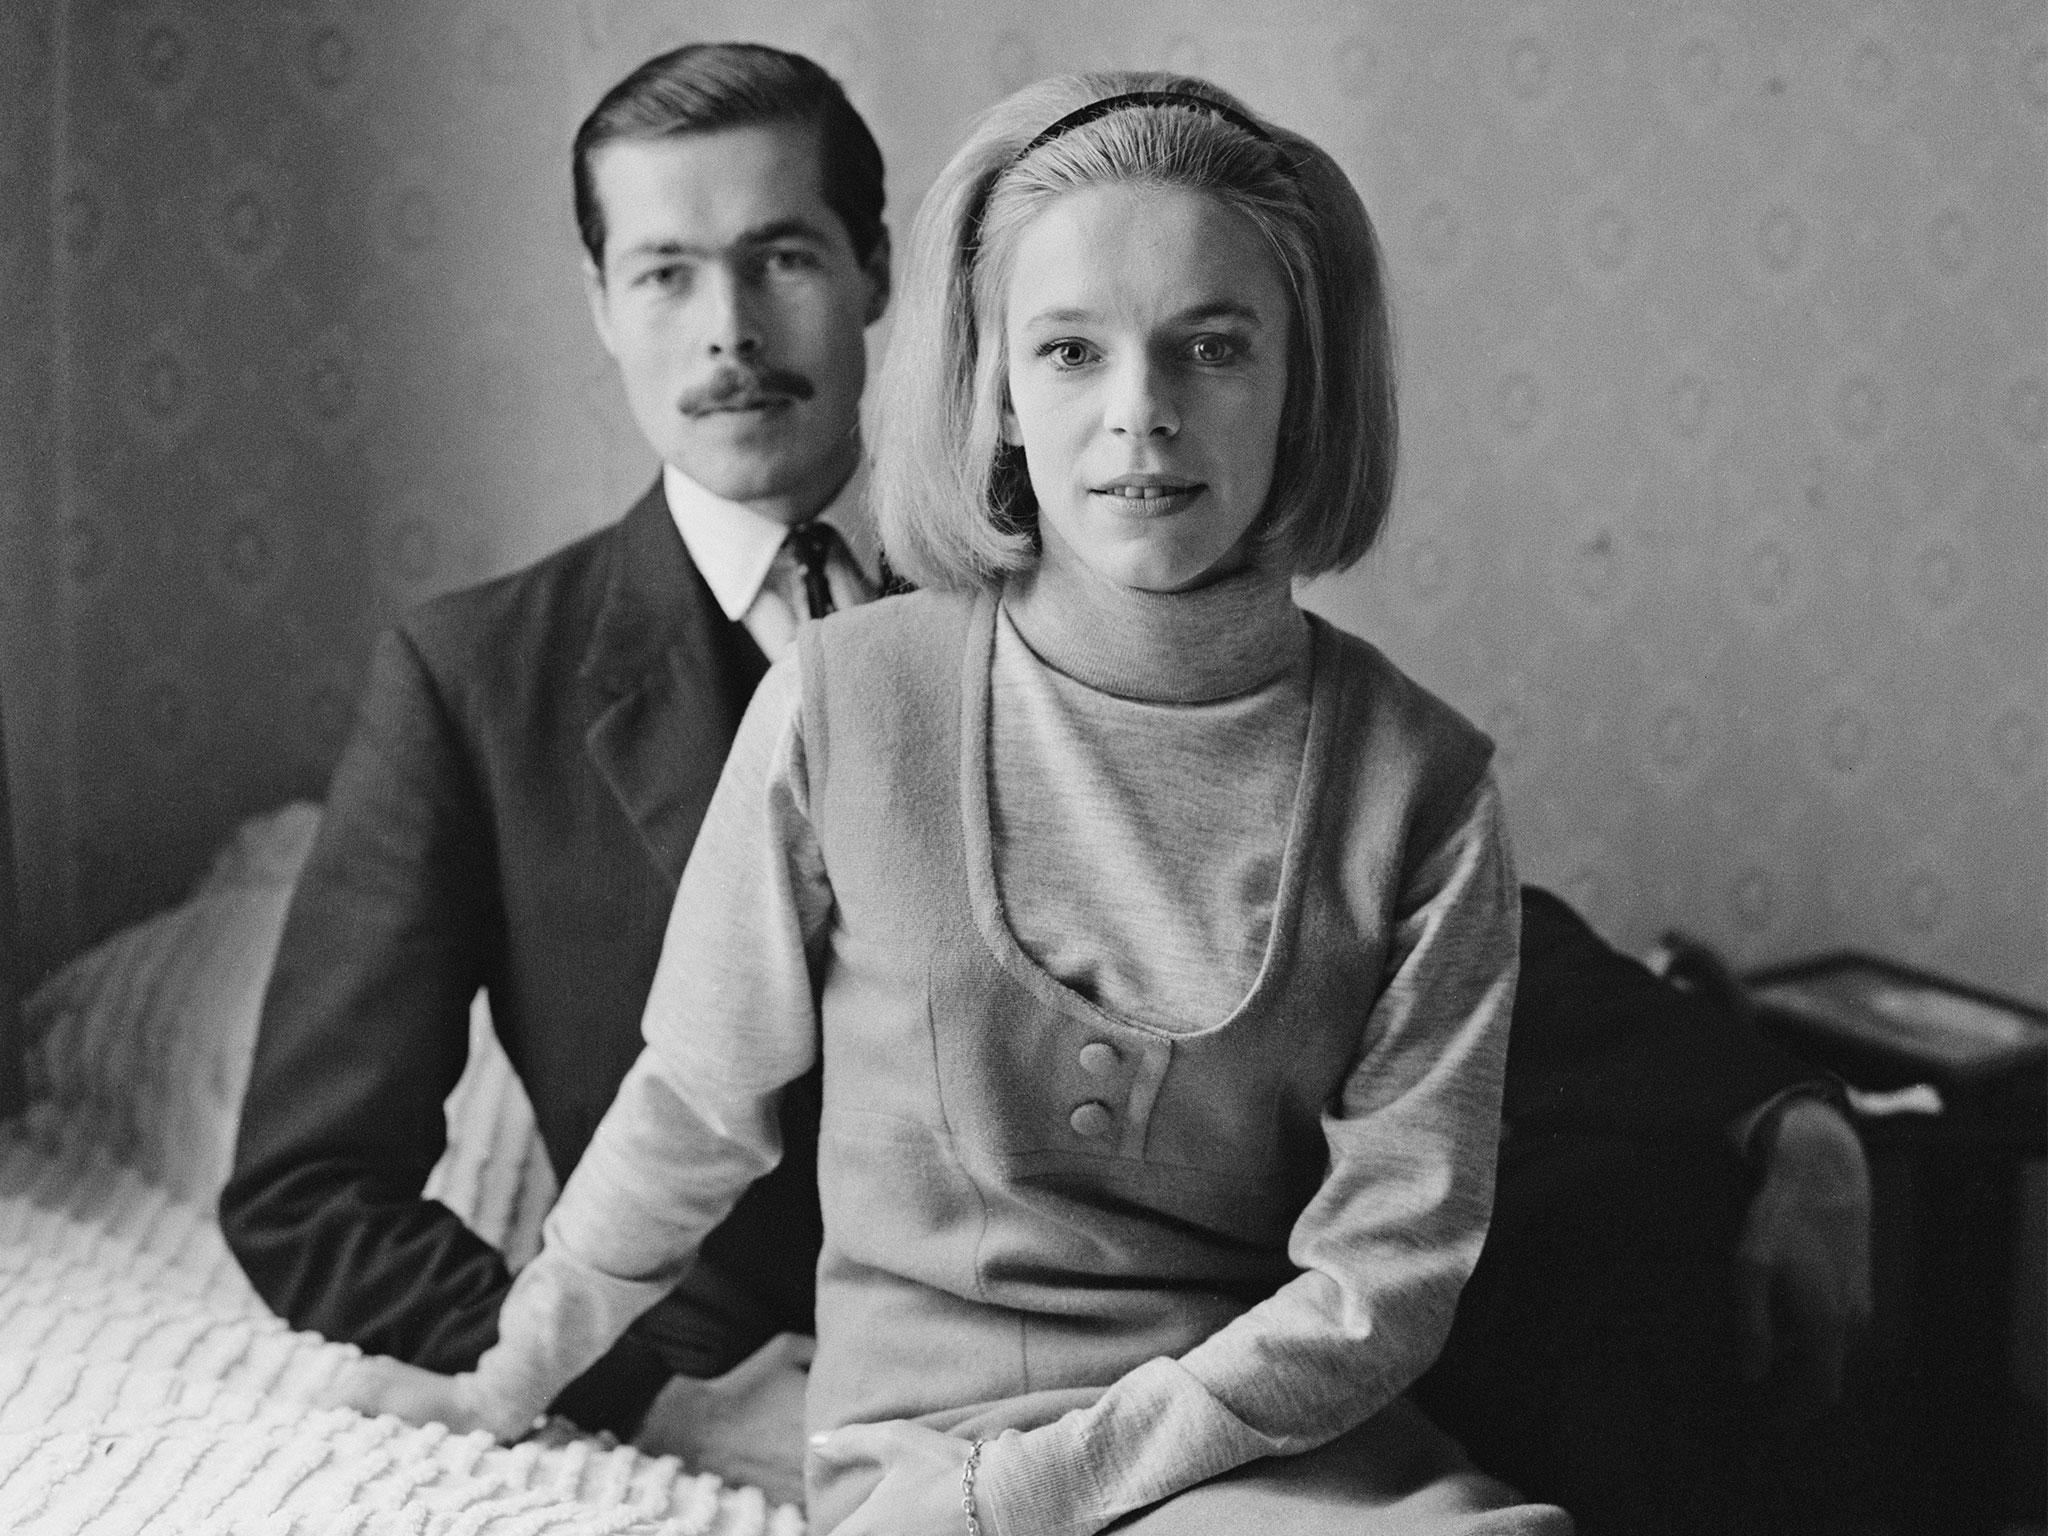 Lady Lucan maintained her estranged husband had killed himself in 1974